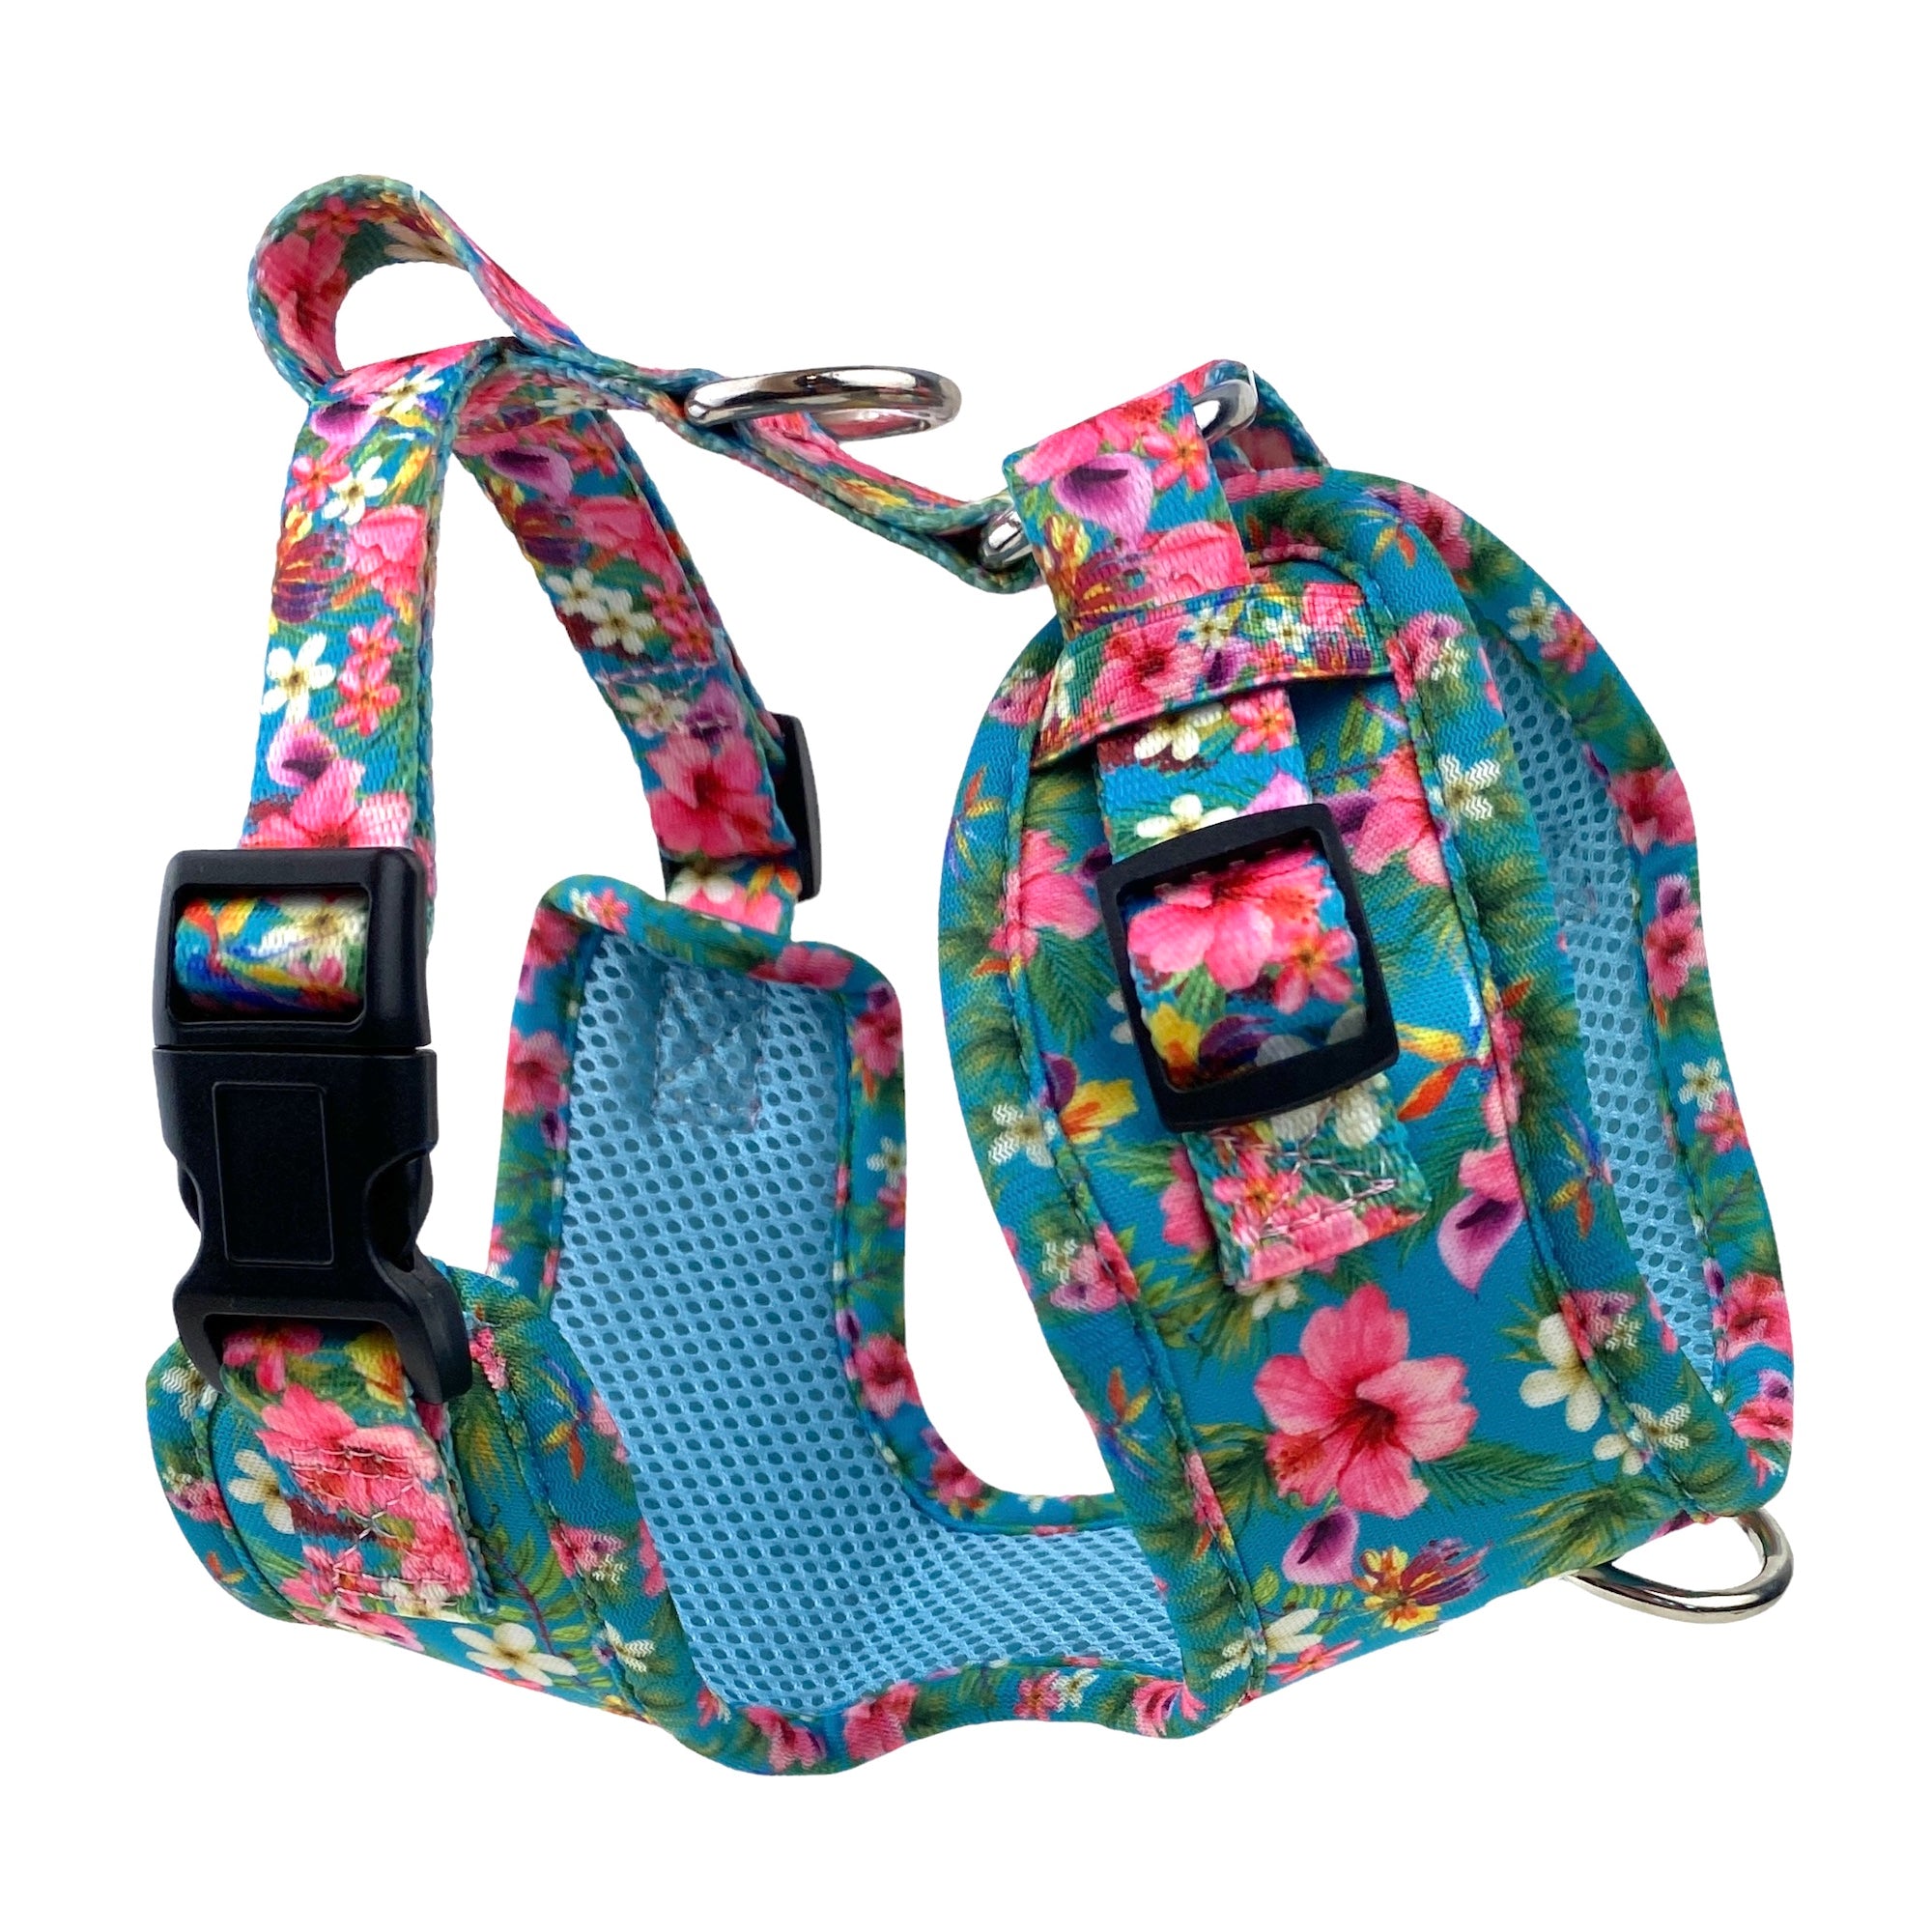 a 3D image of a no escape harness from Fearless pet in bright teal with Hawaiian flowers print dog harness